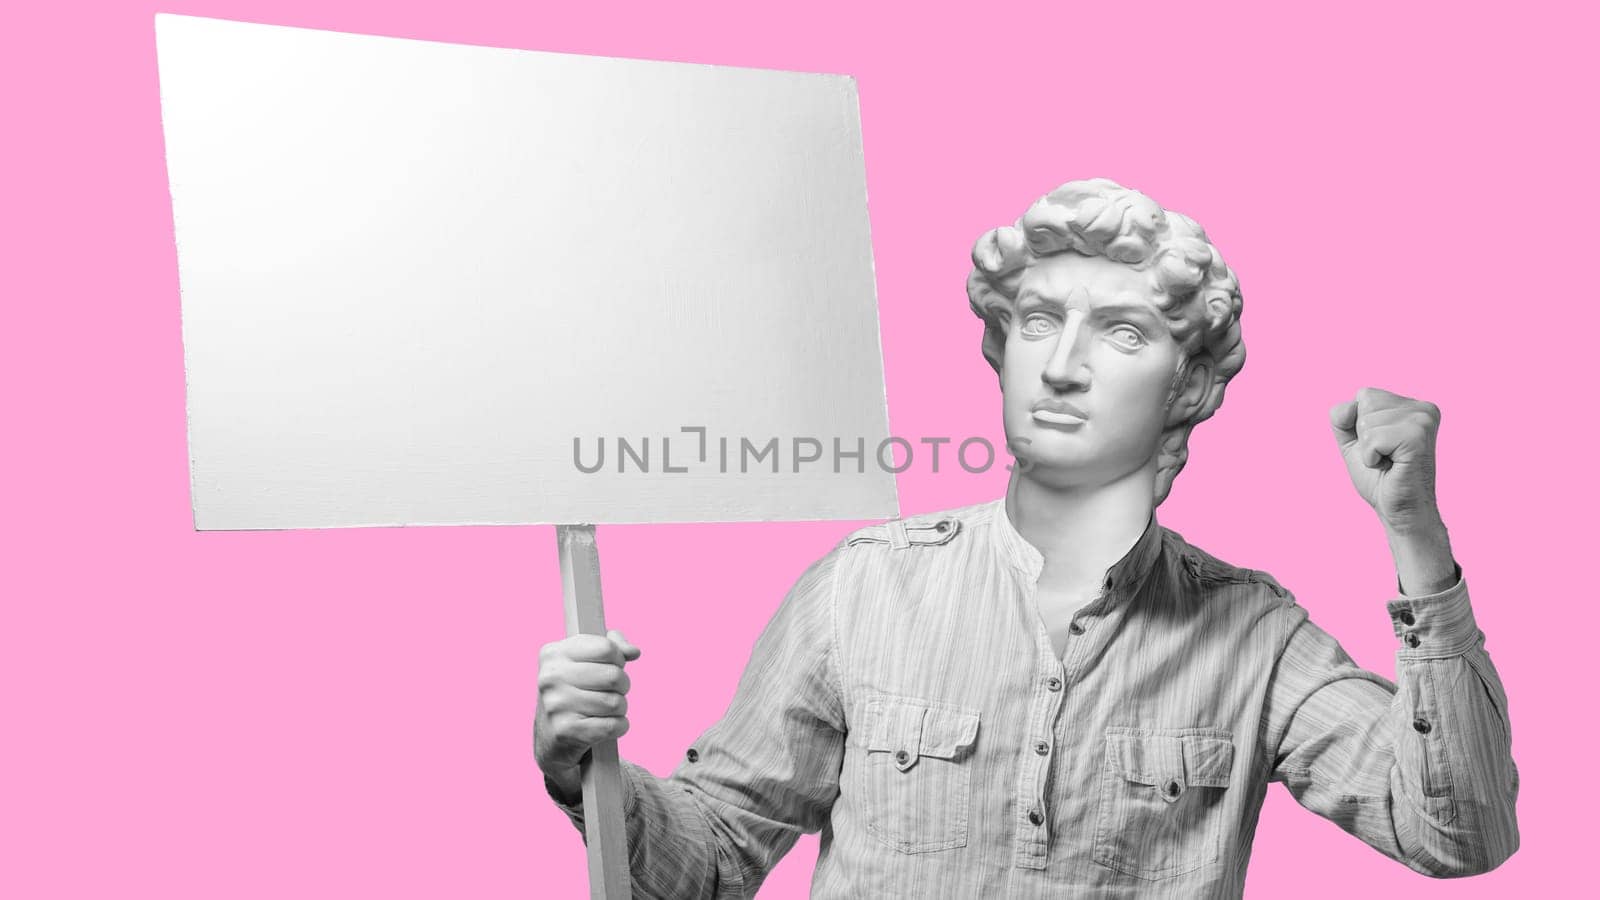 Abstract modern collage. The man with the plaster head of David Angry protesting worker with blank protest sign on pink background by zartarn